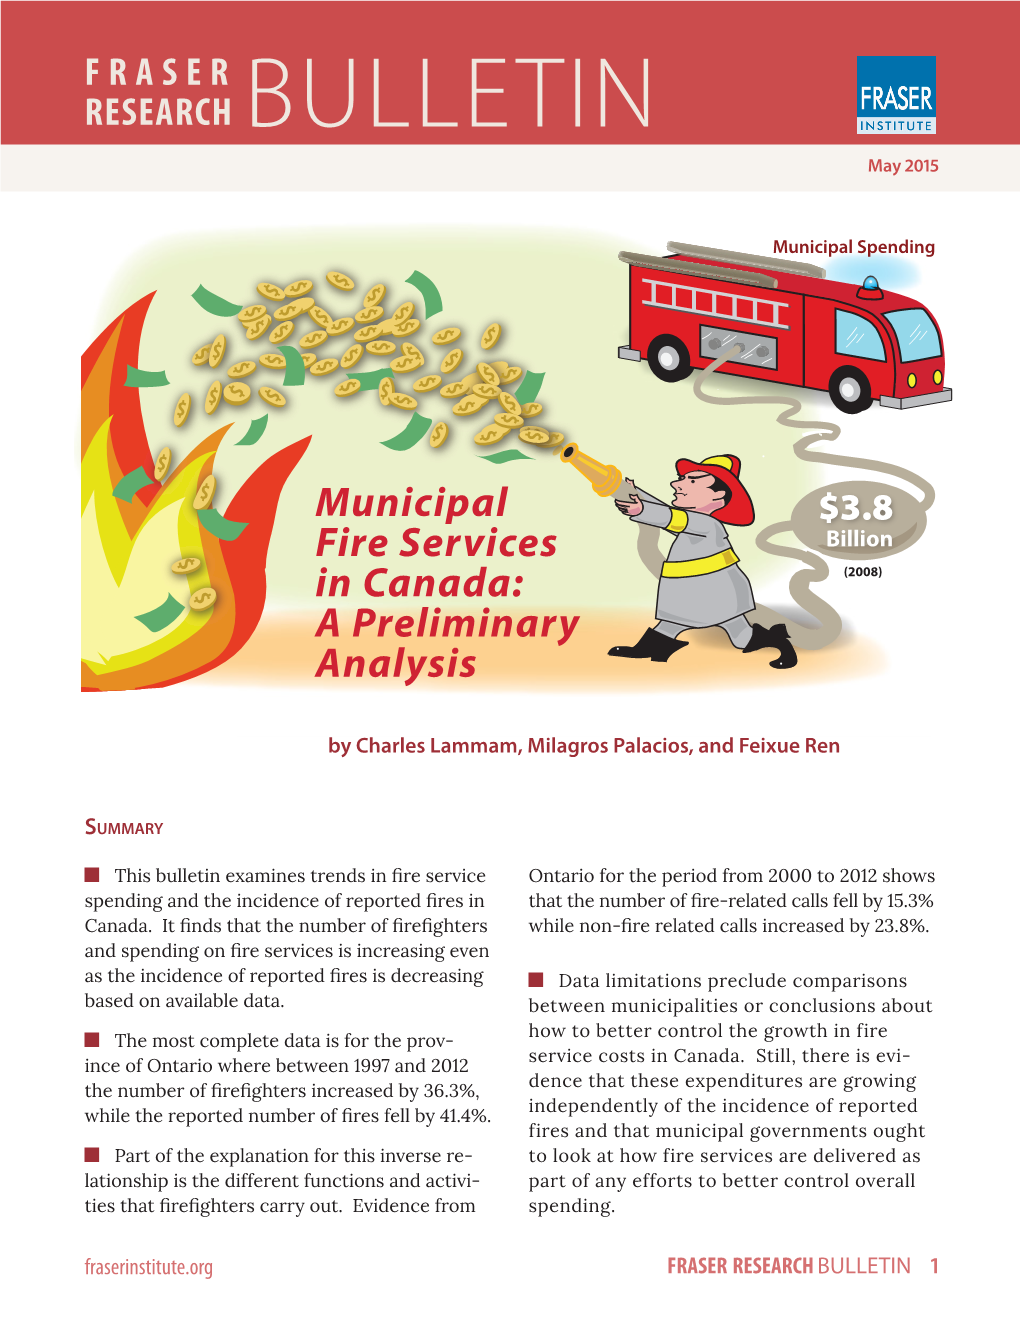 Municipal Fire Services in Canada: a Preliminary Analysis